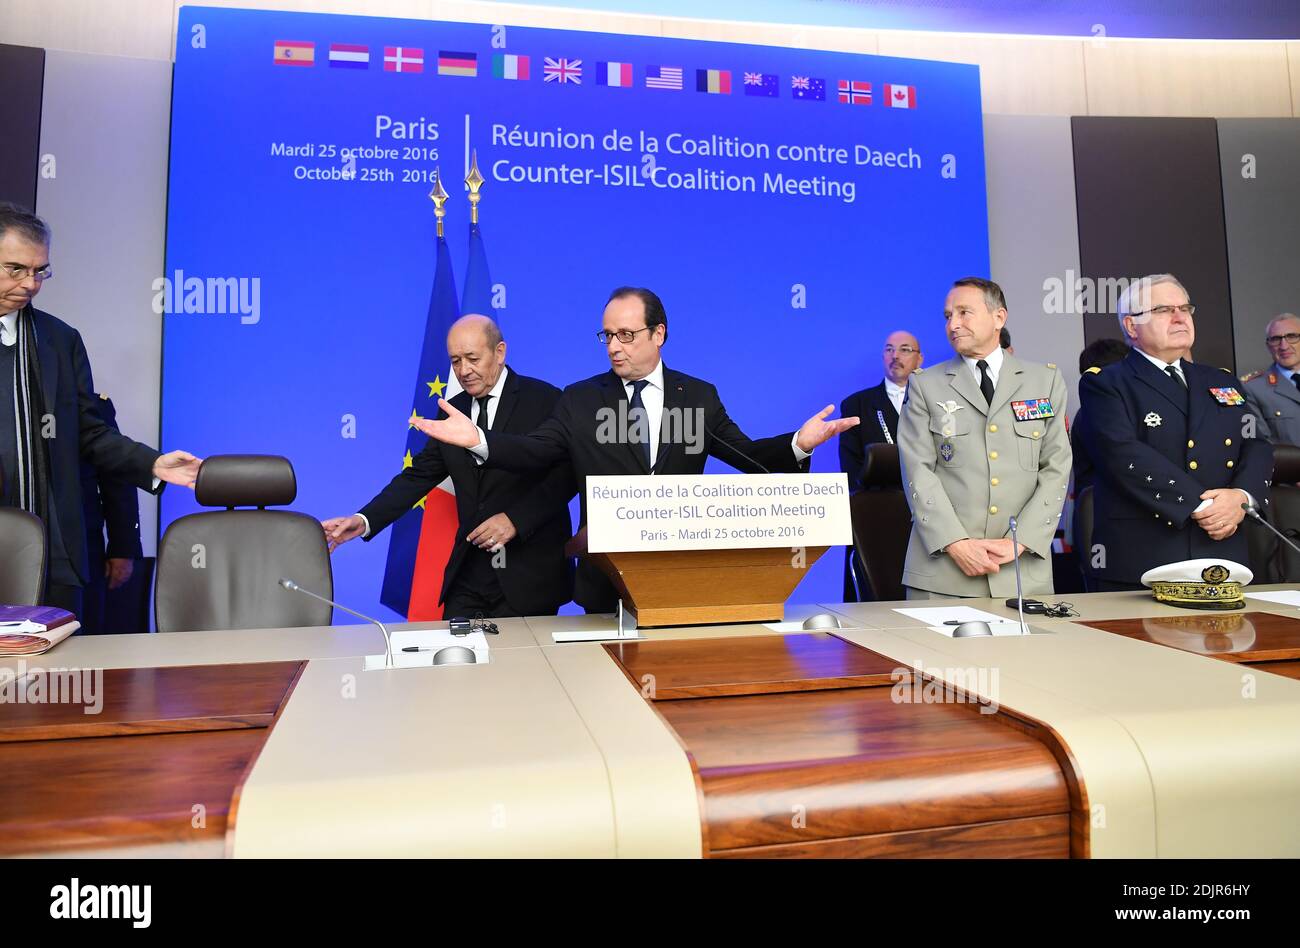 French President Francois Hollande delivers his speech during the opening of a Counter-ISIL Coalition Meeting hosted by French Minister of Defence Jean-Yves Le Drian and attended by the Defence Ministers of the Coalition in Iraq and Syria, Ashton Carter (USA), Michael Fallon (UK), Jeanine Hennis-Plasschaert (Netherlands), Marise Payne (Australia), Roberta Pinotti (Italy), Ursula Von Der Leyen (Germany), Pedro Morenes (Spain), Peter Christensen (Denmark), Ine Marie Eriksen Soreide (Norway), Steven Vandeput (Belgium), Gerry Brownlee (New Zealand) and Harjit Sajjan (Canada), held at the French Mi Stock Photo